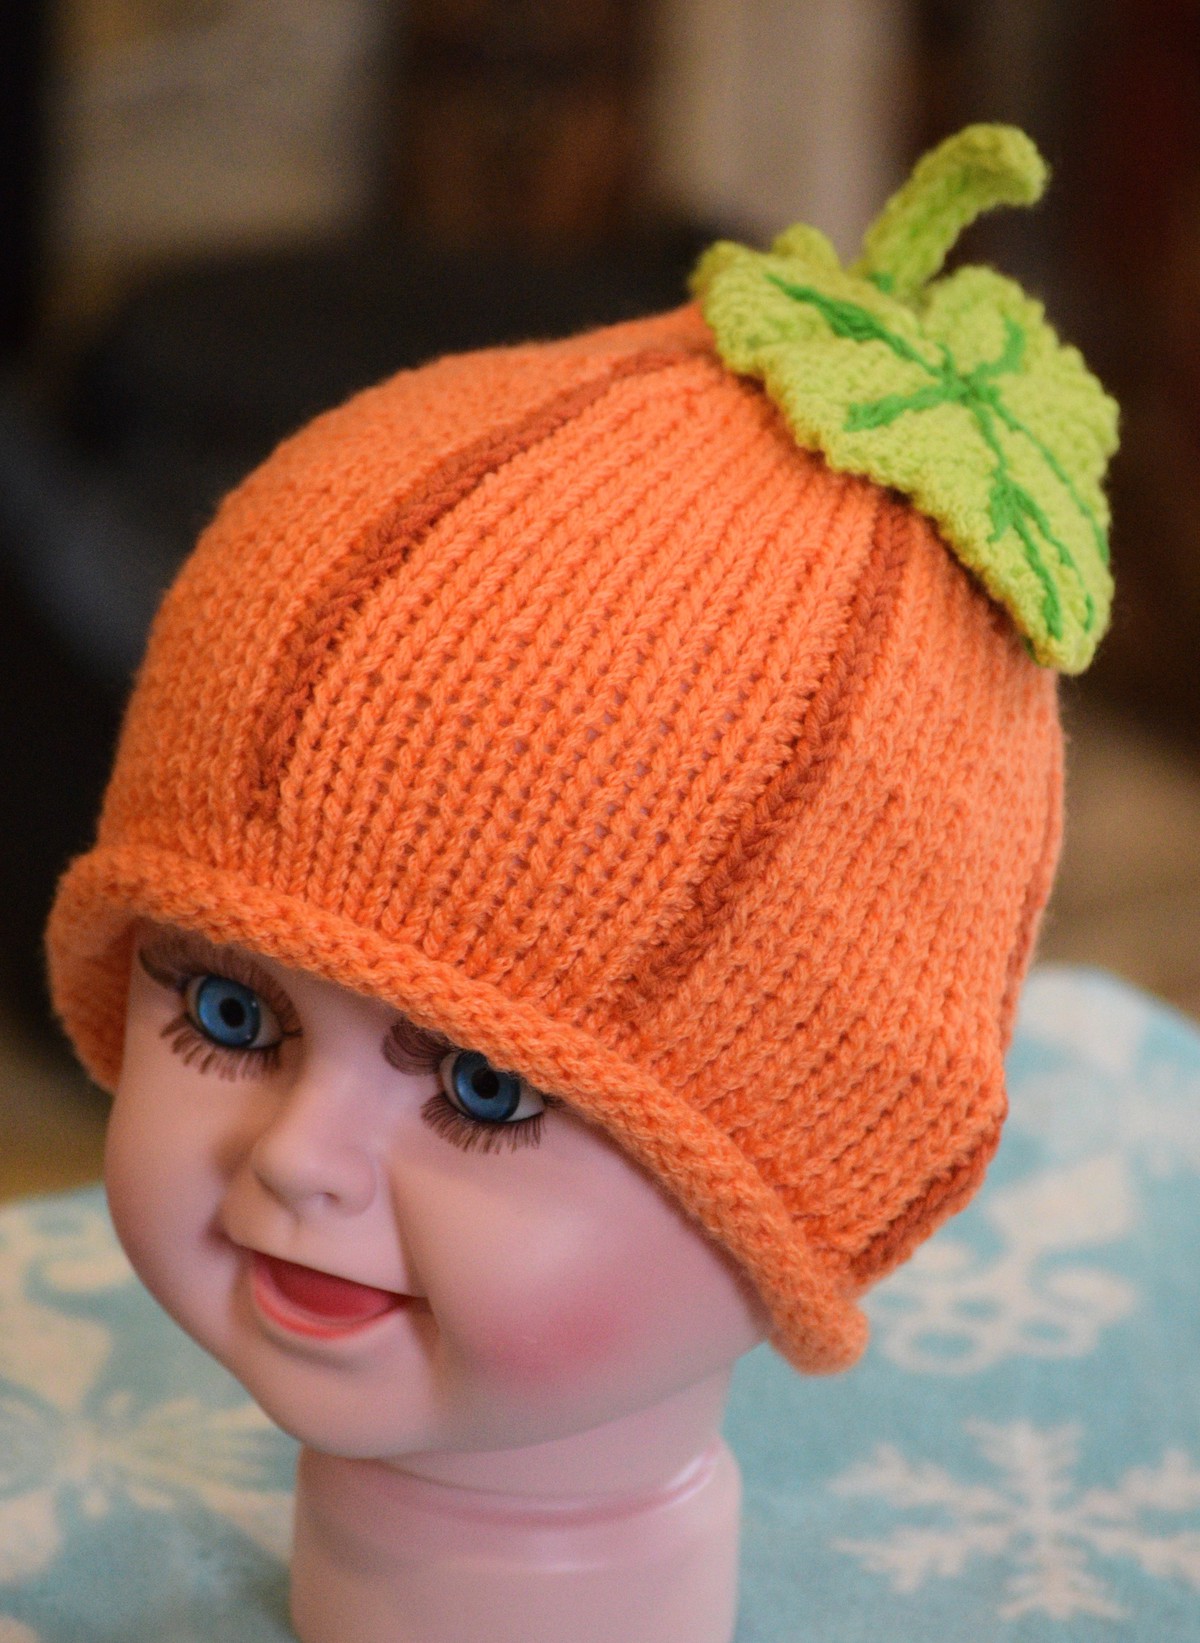 cute pumpkin hat for your baby.  Free knitting pattern!